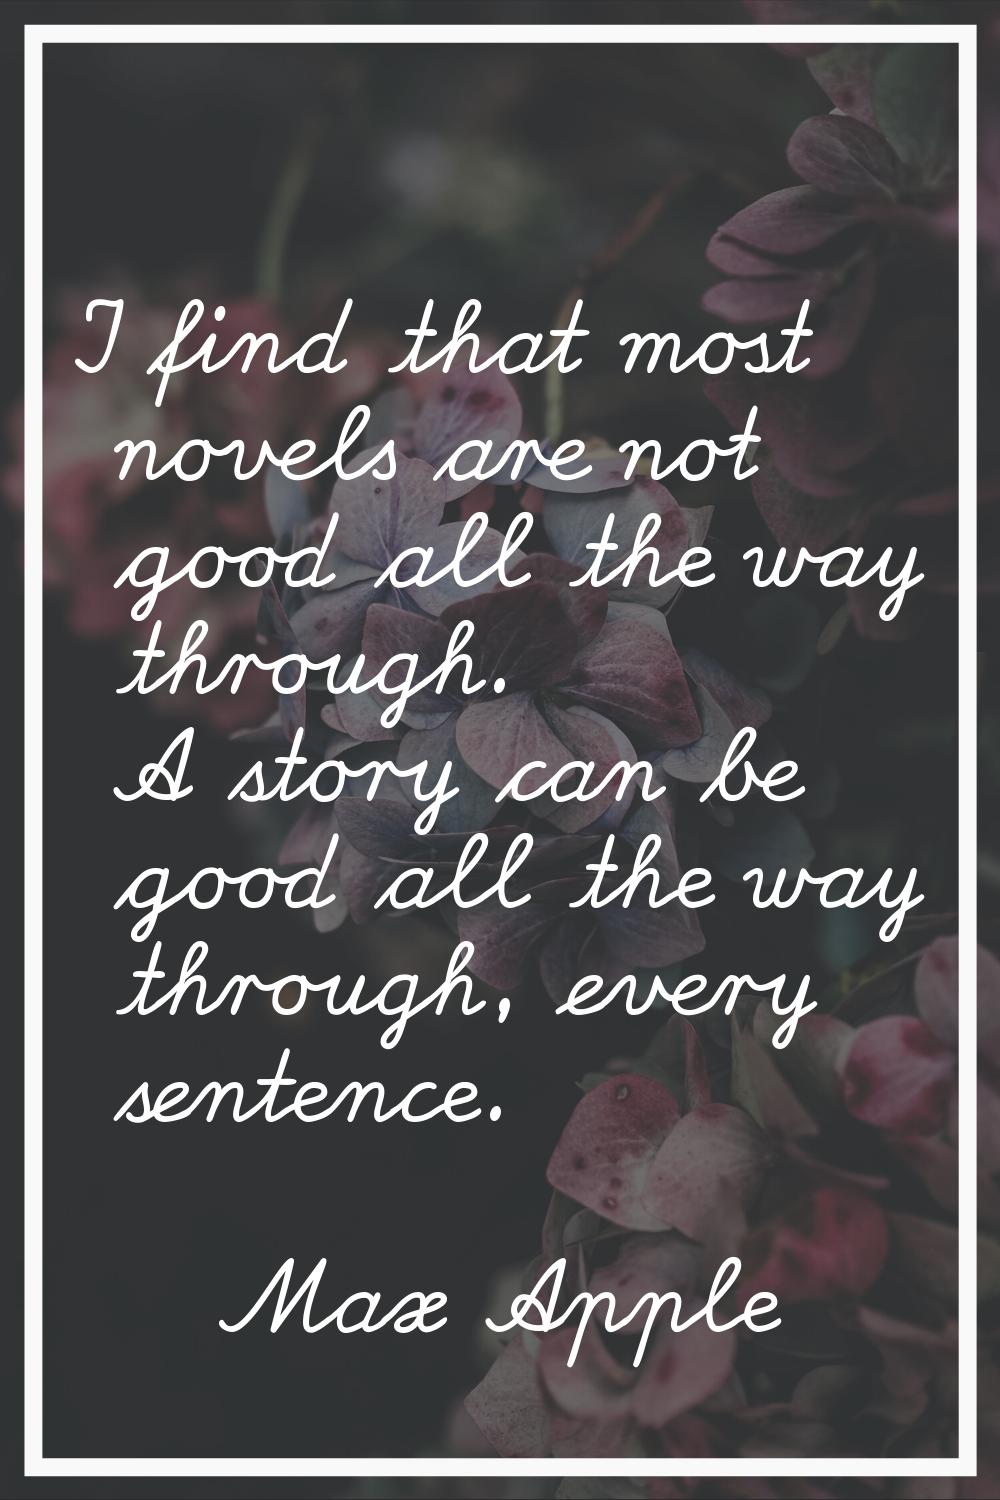 I find that most novels are not good all the way through. A story can be good all the way through, 